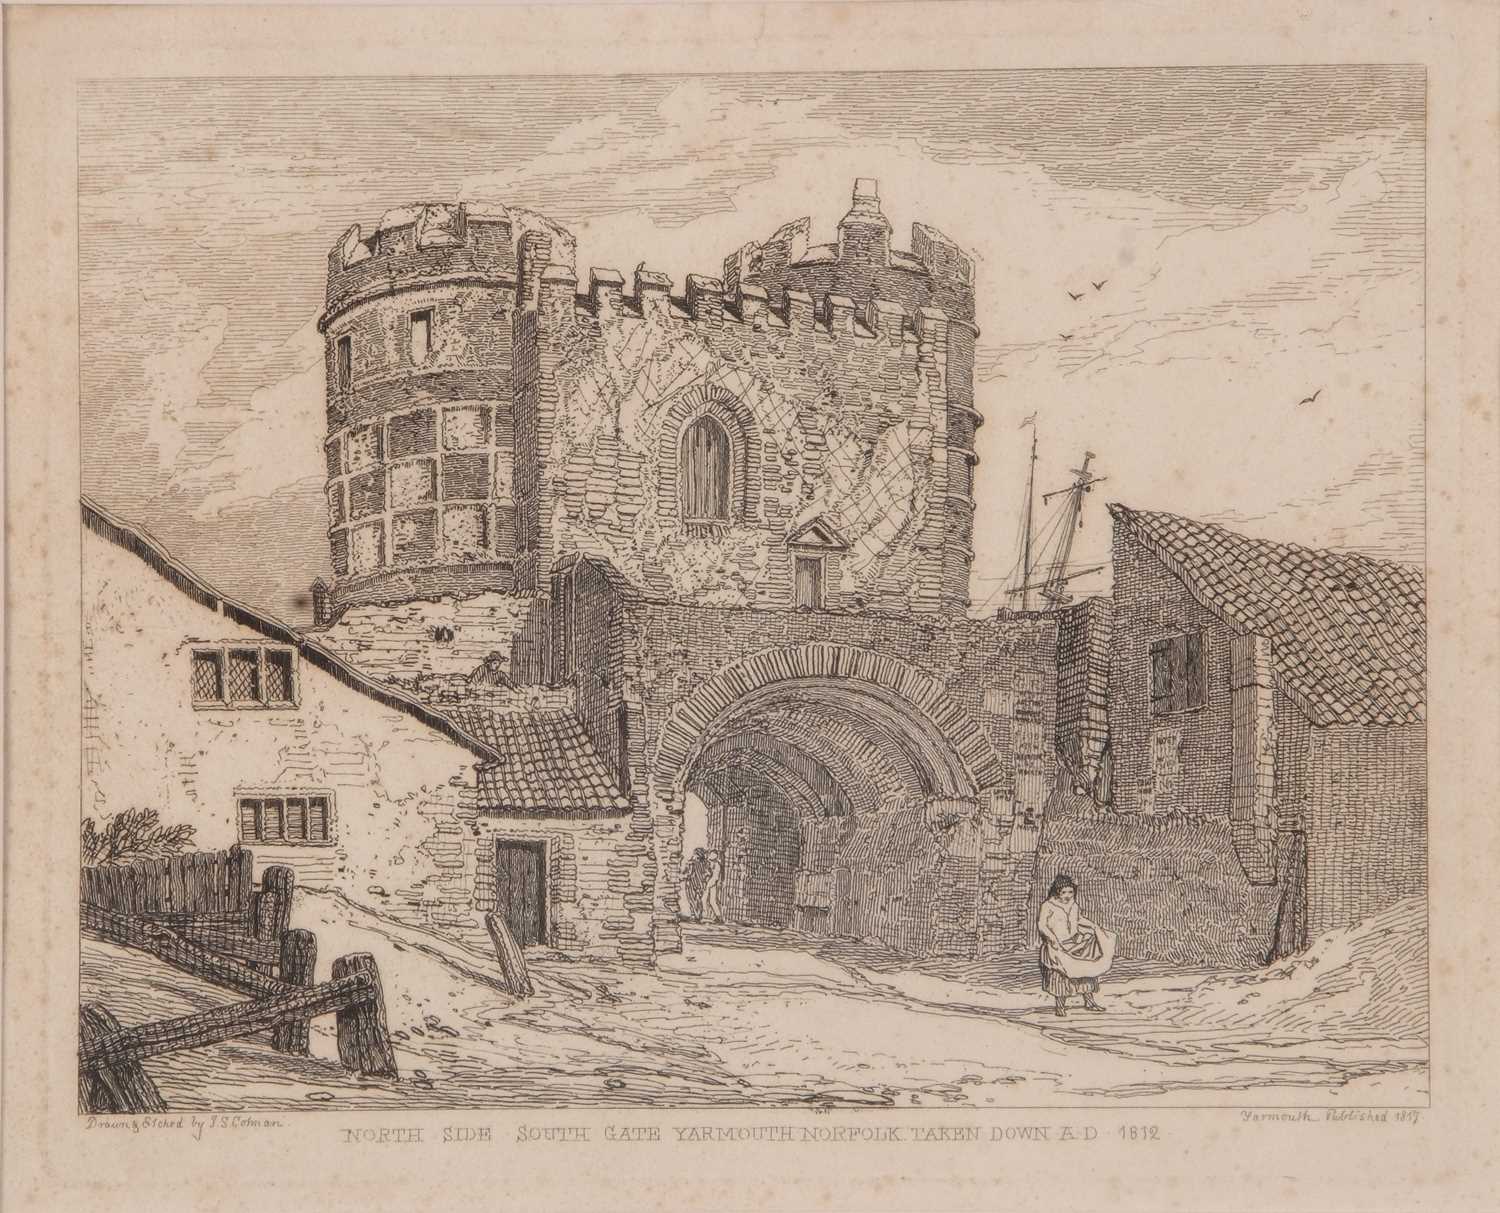 John Sell Cotman (1782-1842), 'North Side, South Gate, Yarmouth, Norfolk', etching from 'Specimens - Image 2 of 2